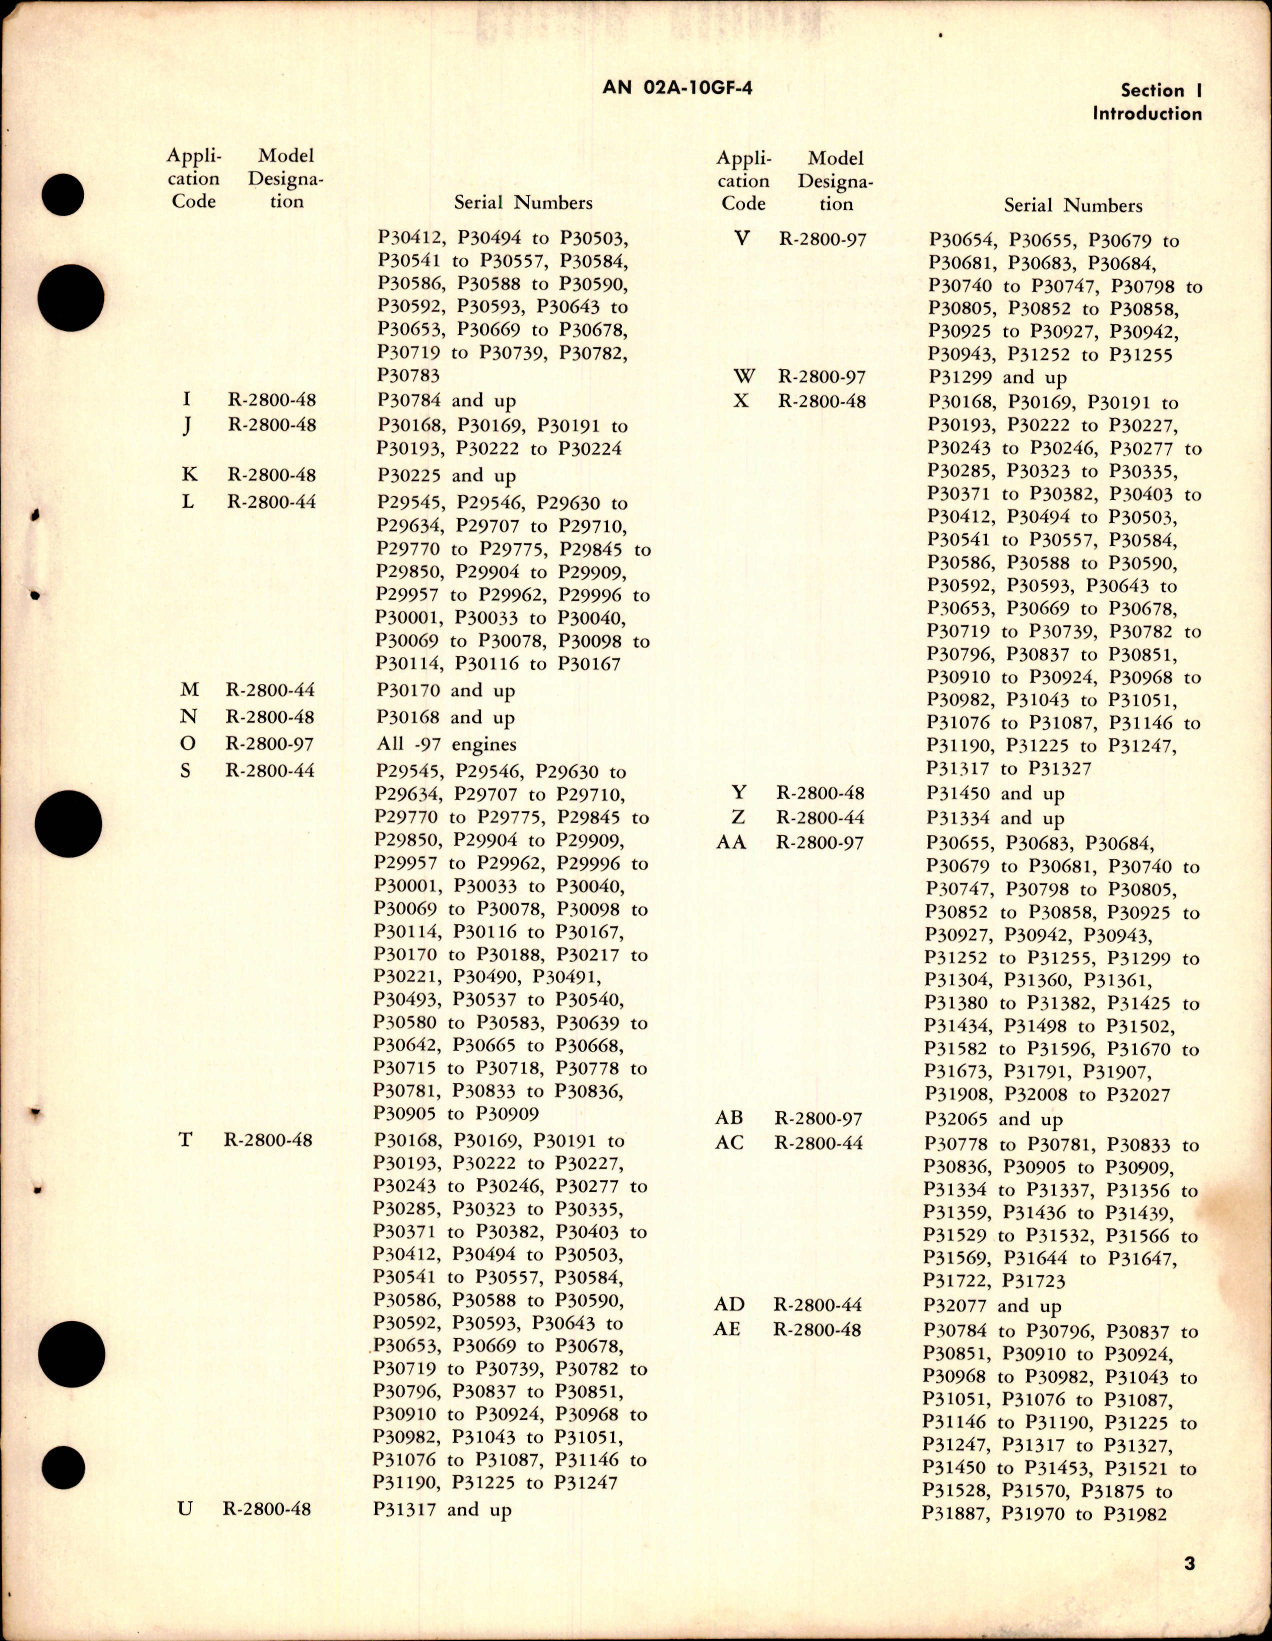 Sample page 7 from AirCorps Library document: Parts Catalog for Models R-2800-44, -48 and -97